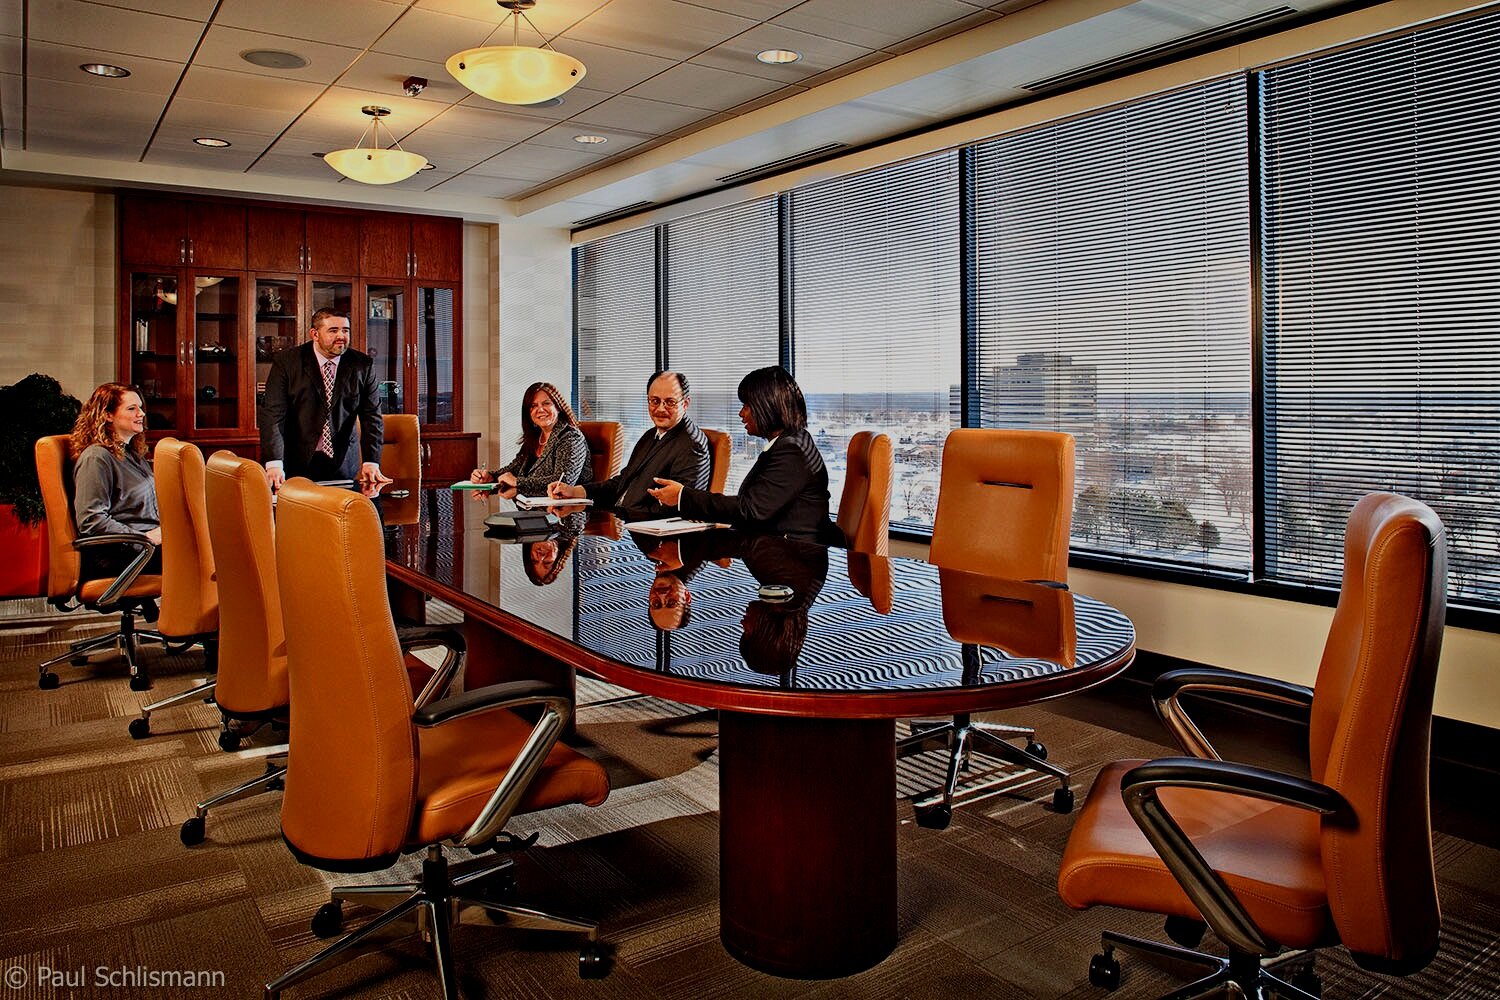 Milwaukee corporate photographer | Group action shot in conference room